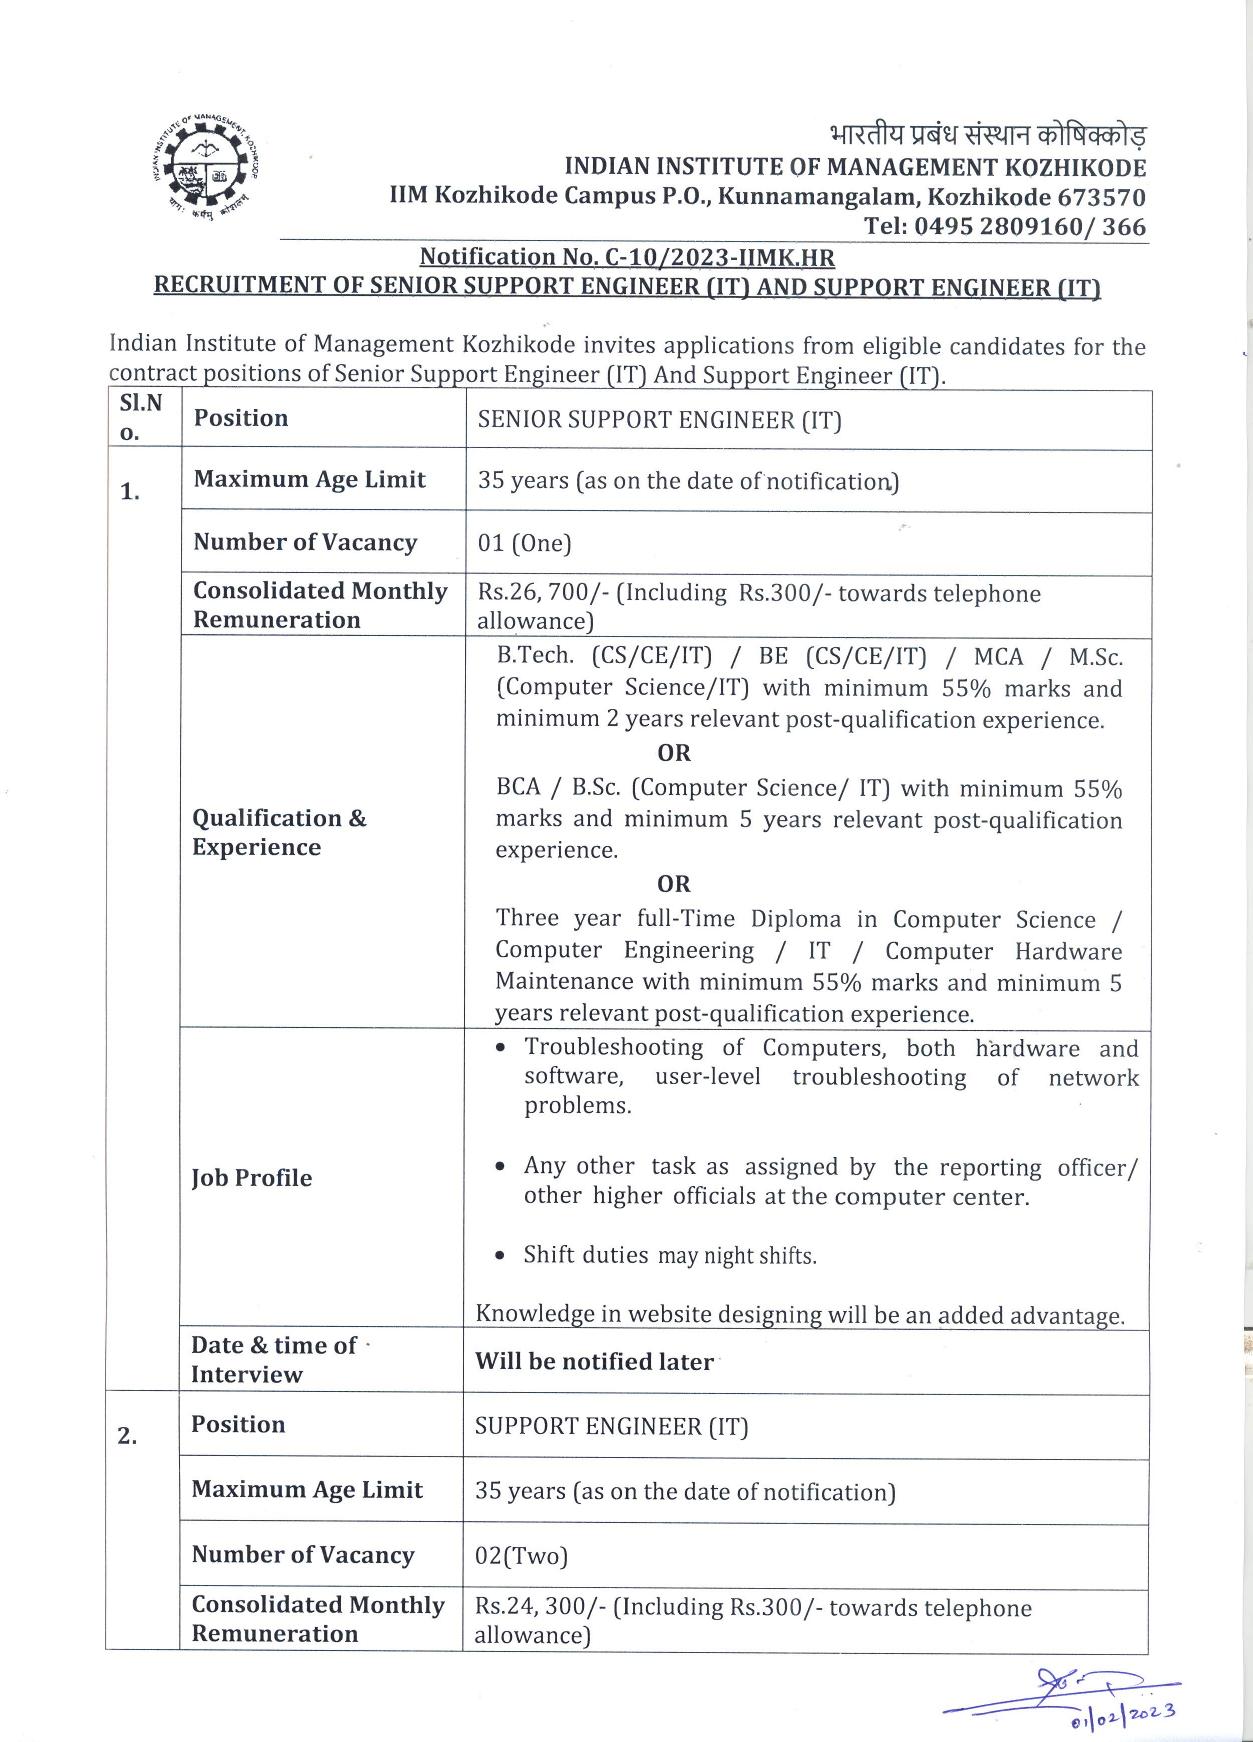 Indian Institute of Management Kozhikode Invites Application for Senior Support Engineer, Support Engineer Recruitment 2023 - Page 2